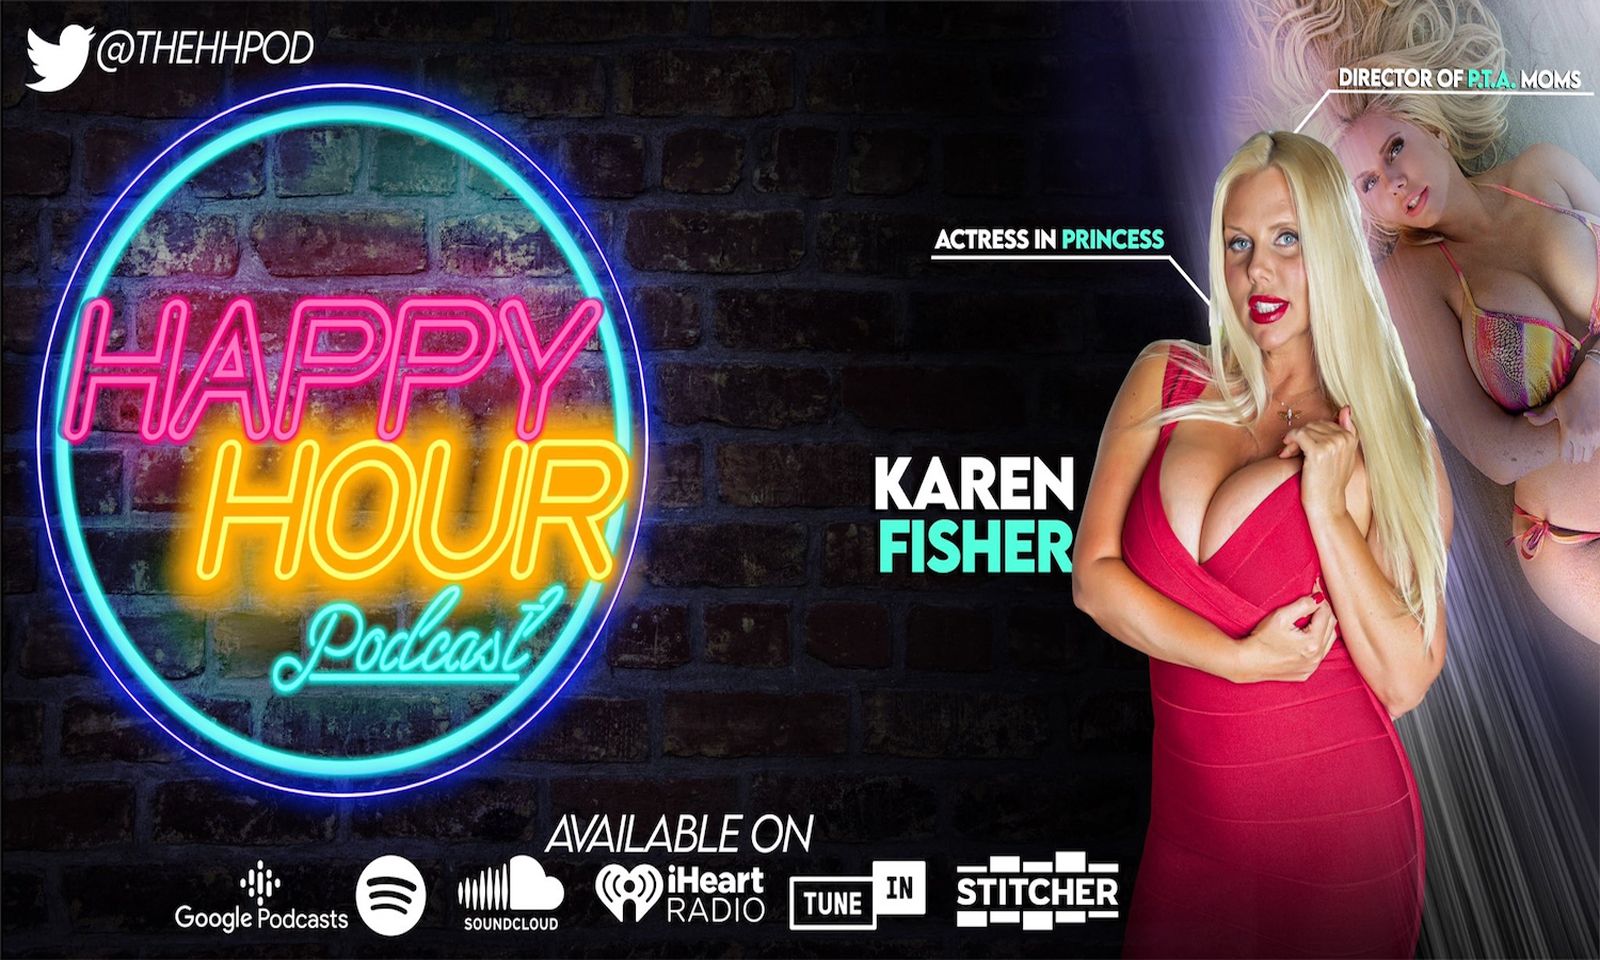 Ultimate MILF Karen Fisher Makes 'The Happy Hour Podcast' Happier